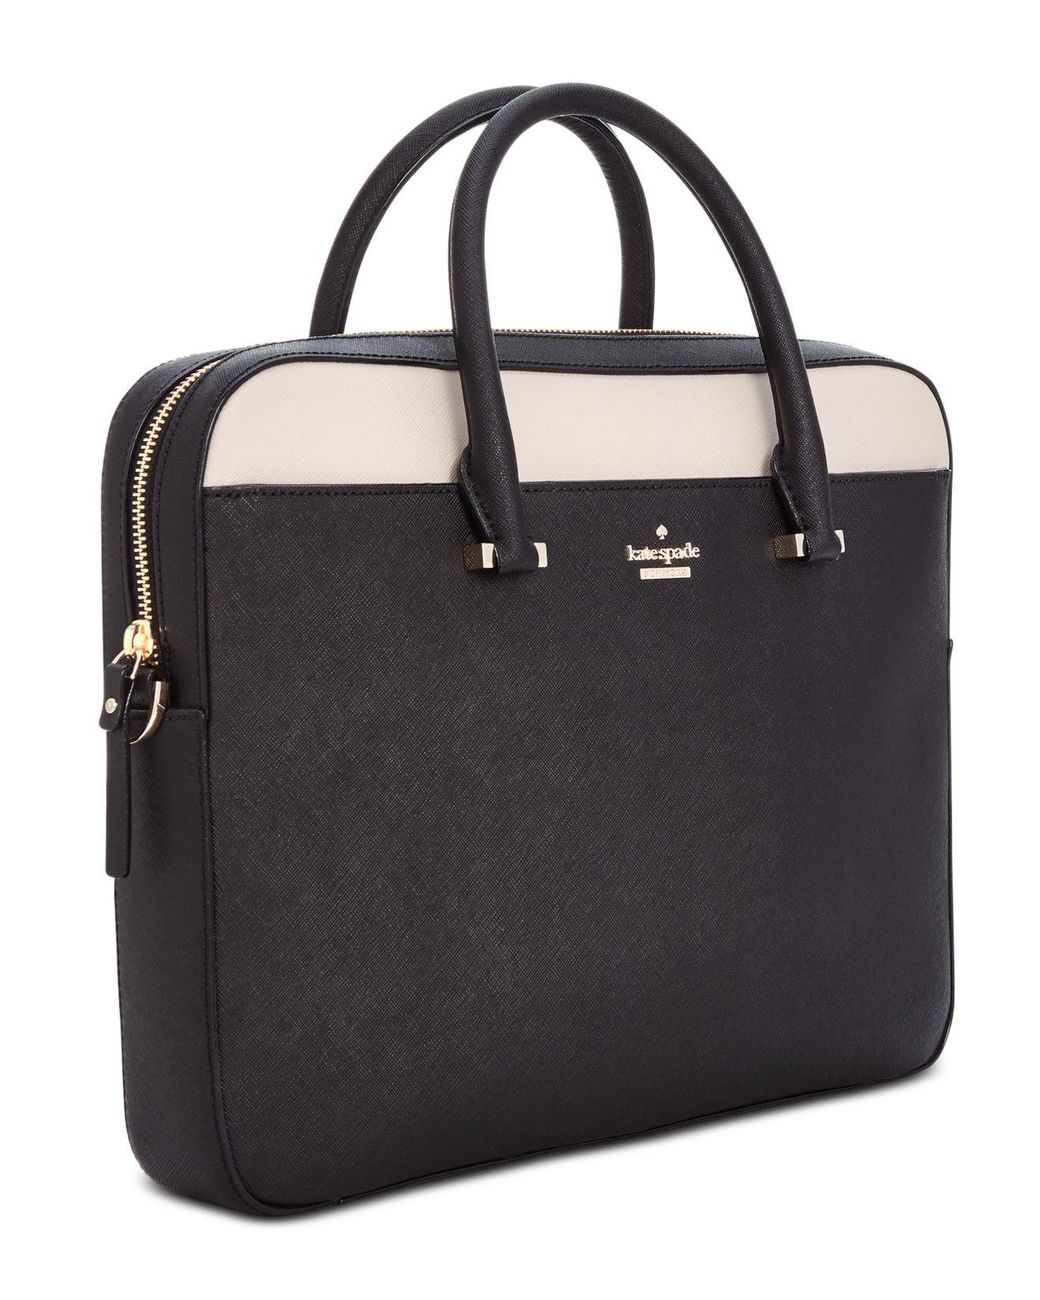 Kate Spade New York Perry Leather Laptop Tote | Brixton Baker